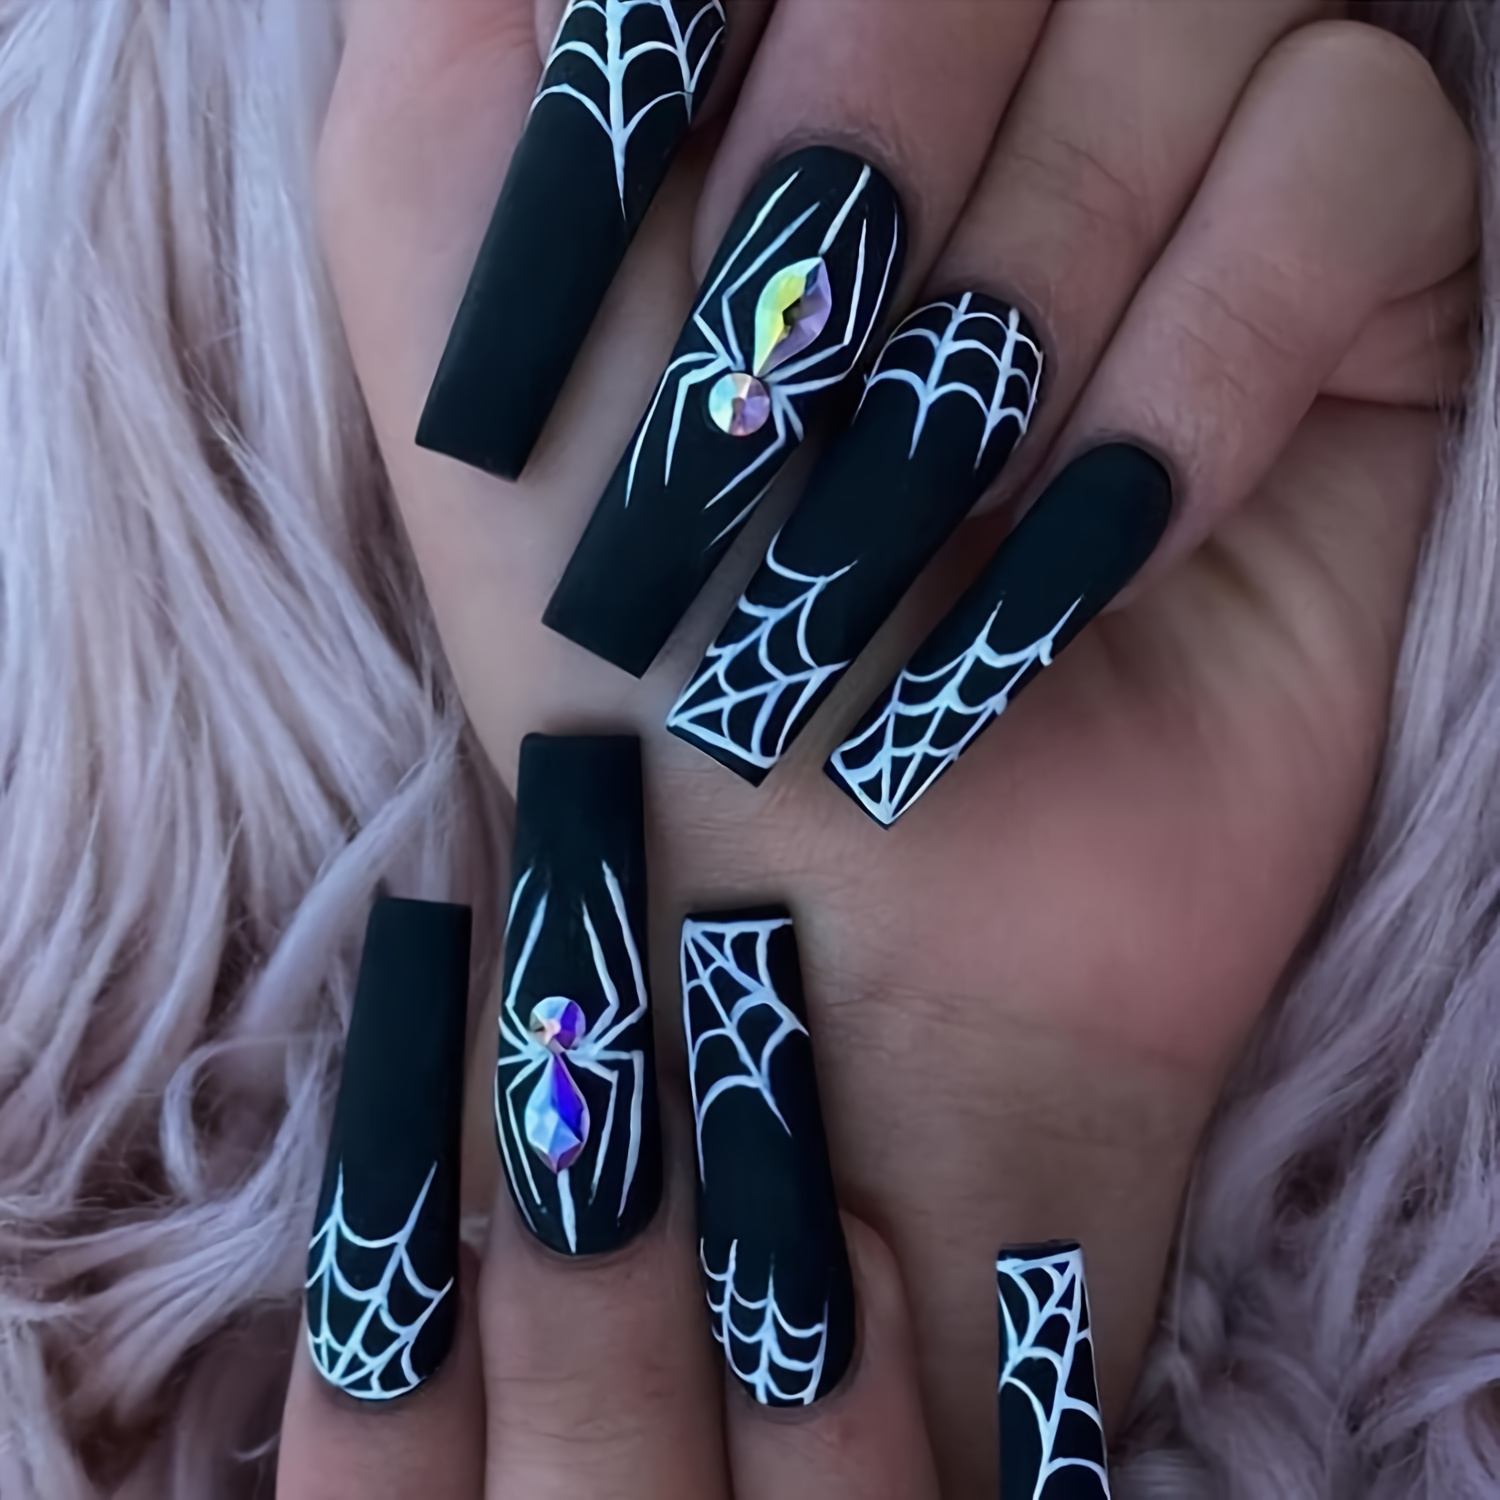 

24pcs Matte Black Fake Nails, White Cobweb And Rhinestone Spider With Design, Full Cover Long Coffin False Nails For Women Girls